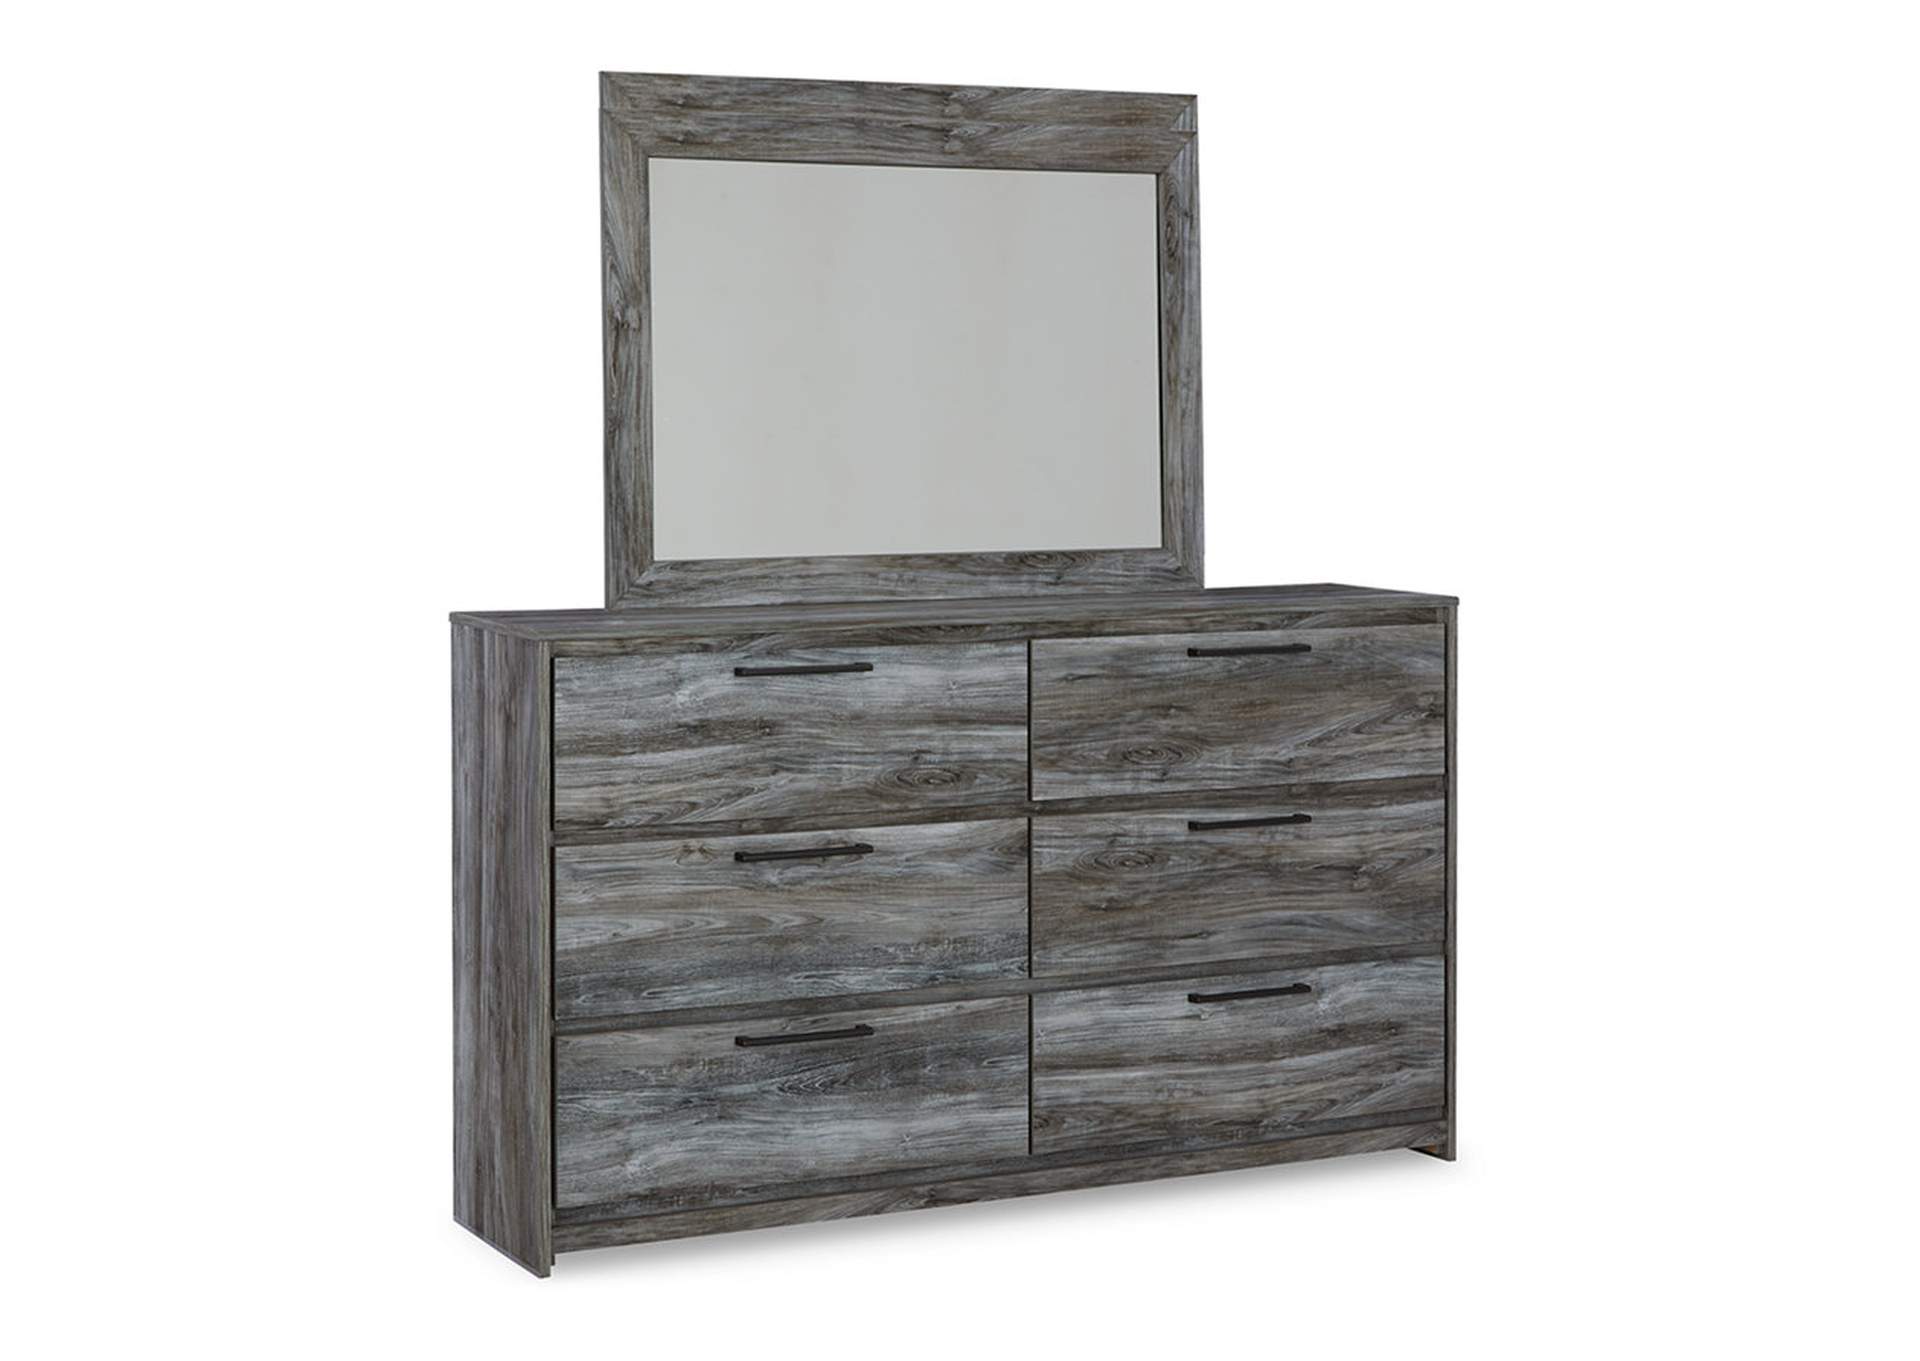 Baystorm Dresser and Mirror,Signature Design By Ashley